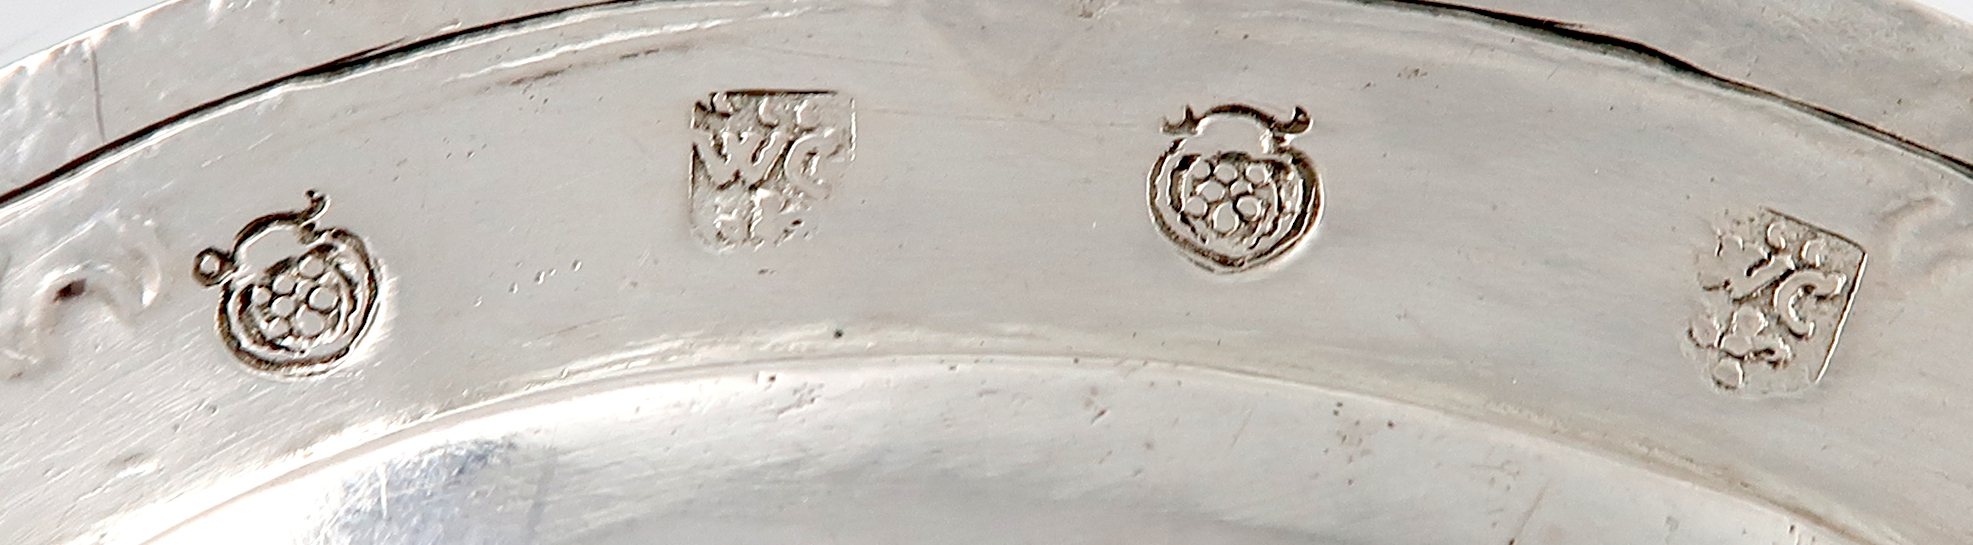 A late 17th century silver West Country paten or small footed dish in the Chinoiserie manner, by - Image 2 of 2